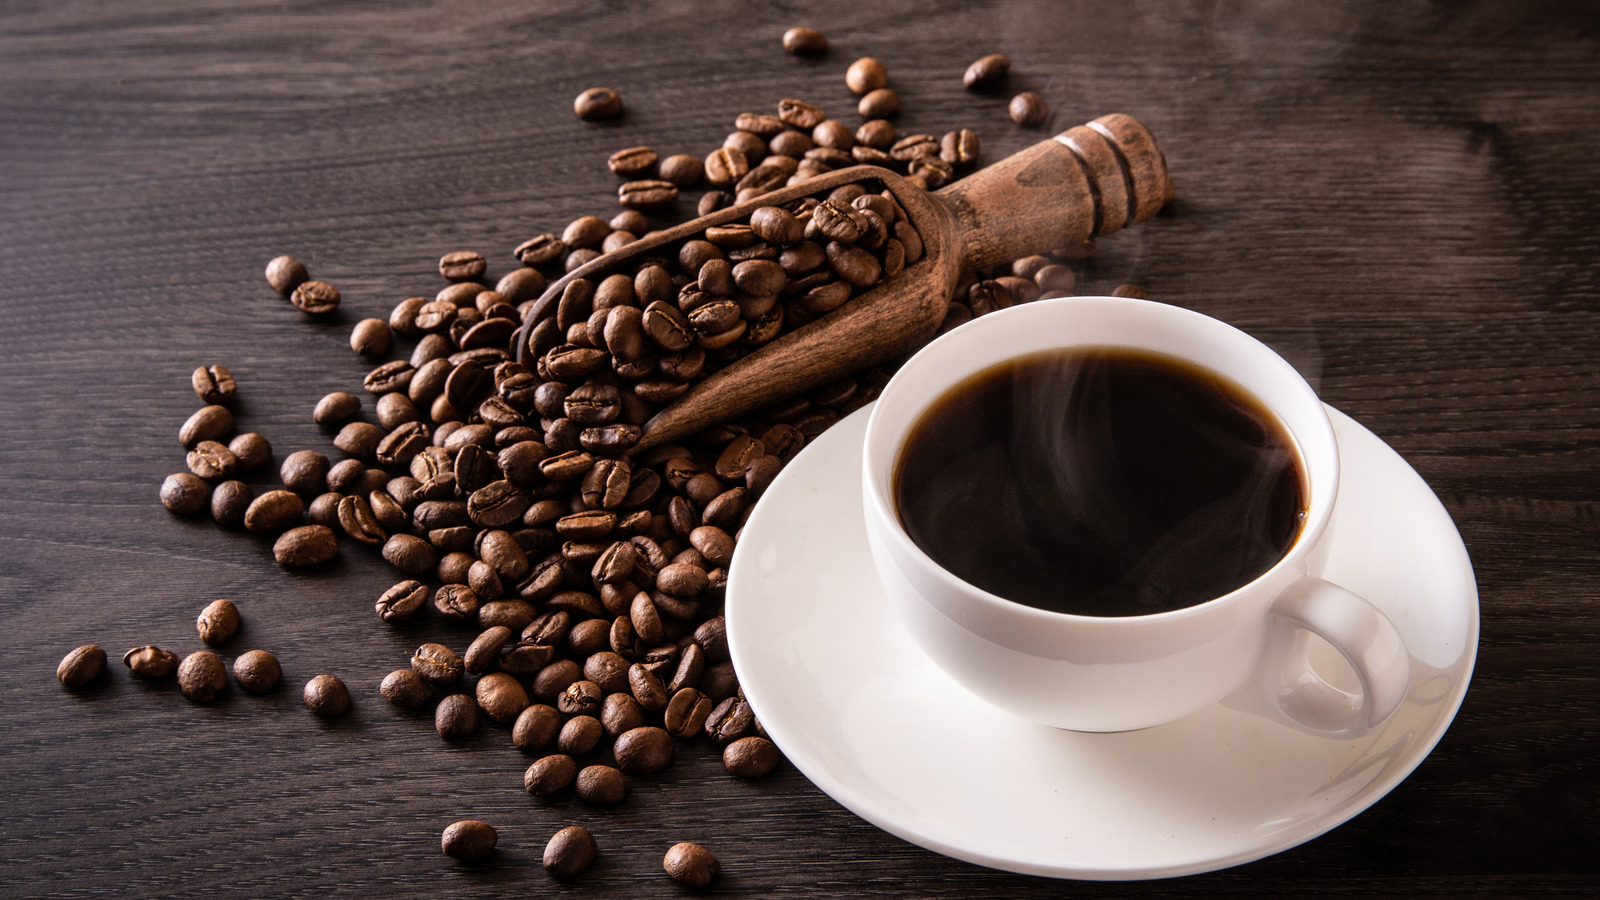 Study Reveals Unexpected Connection Between Coffee And COVID-19